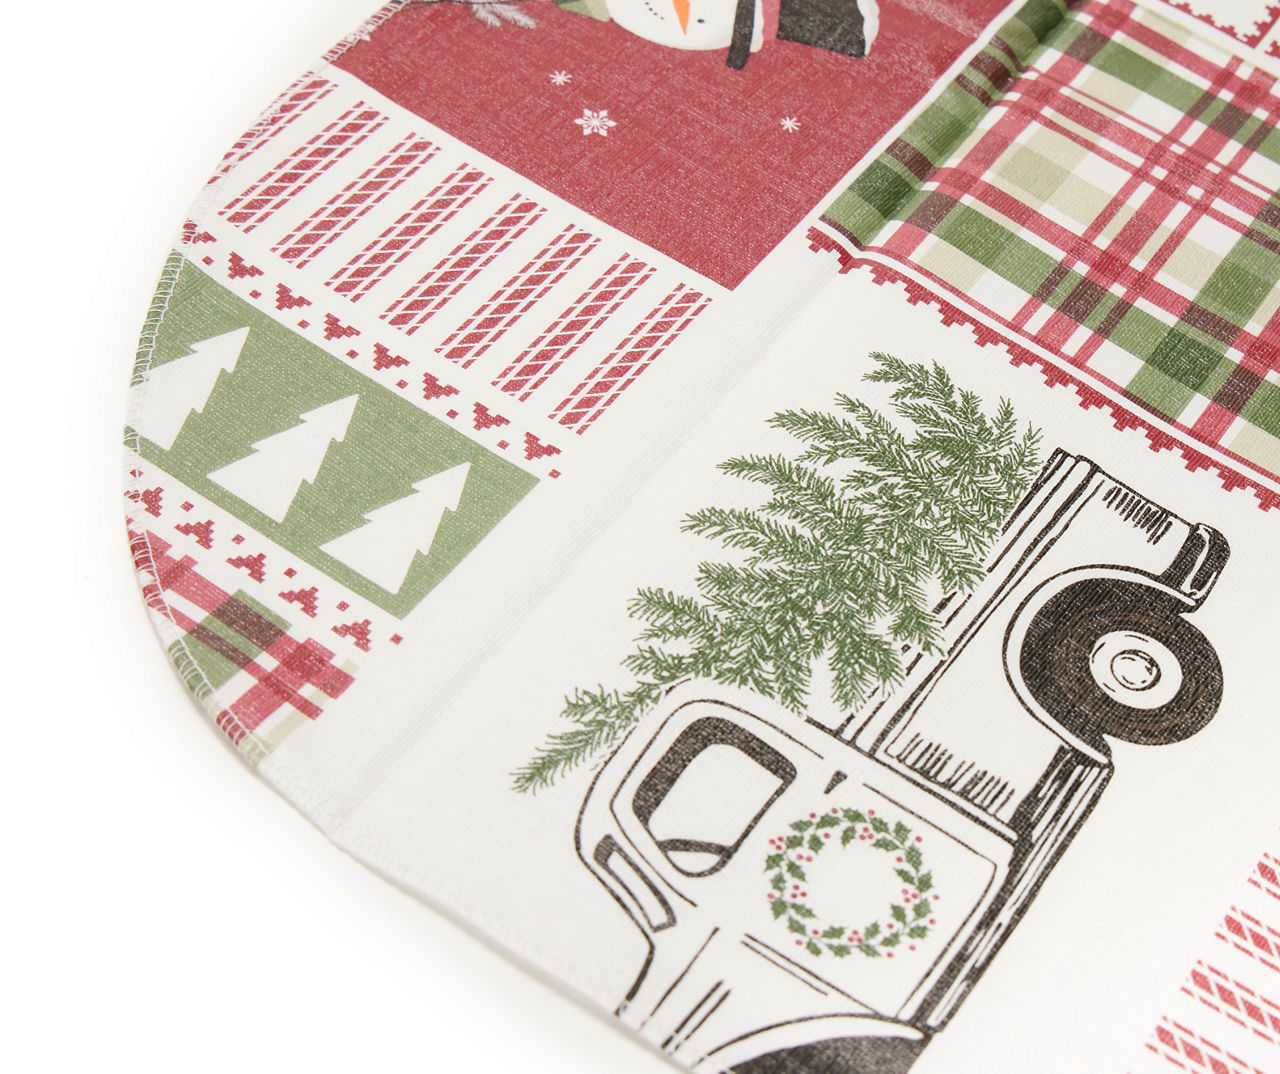 Winter Wonder Lane Home for the Holidays Red & Green Holiday Patchwork Round PEVA Tablecloth, (60")